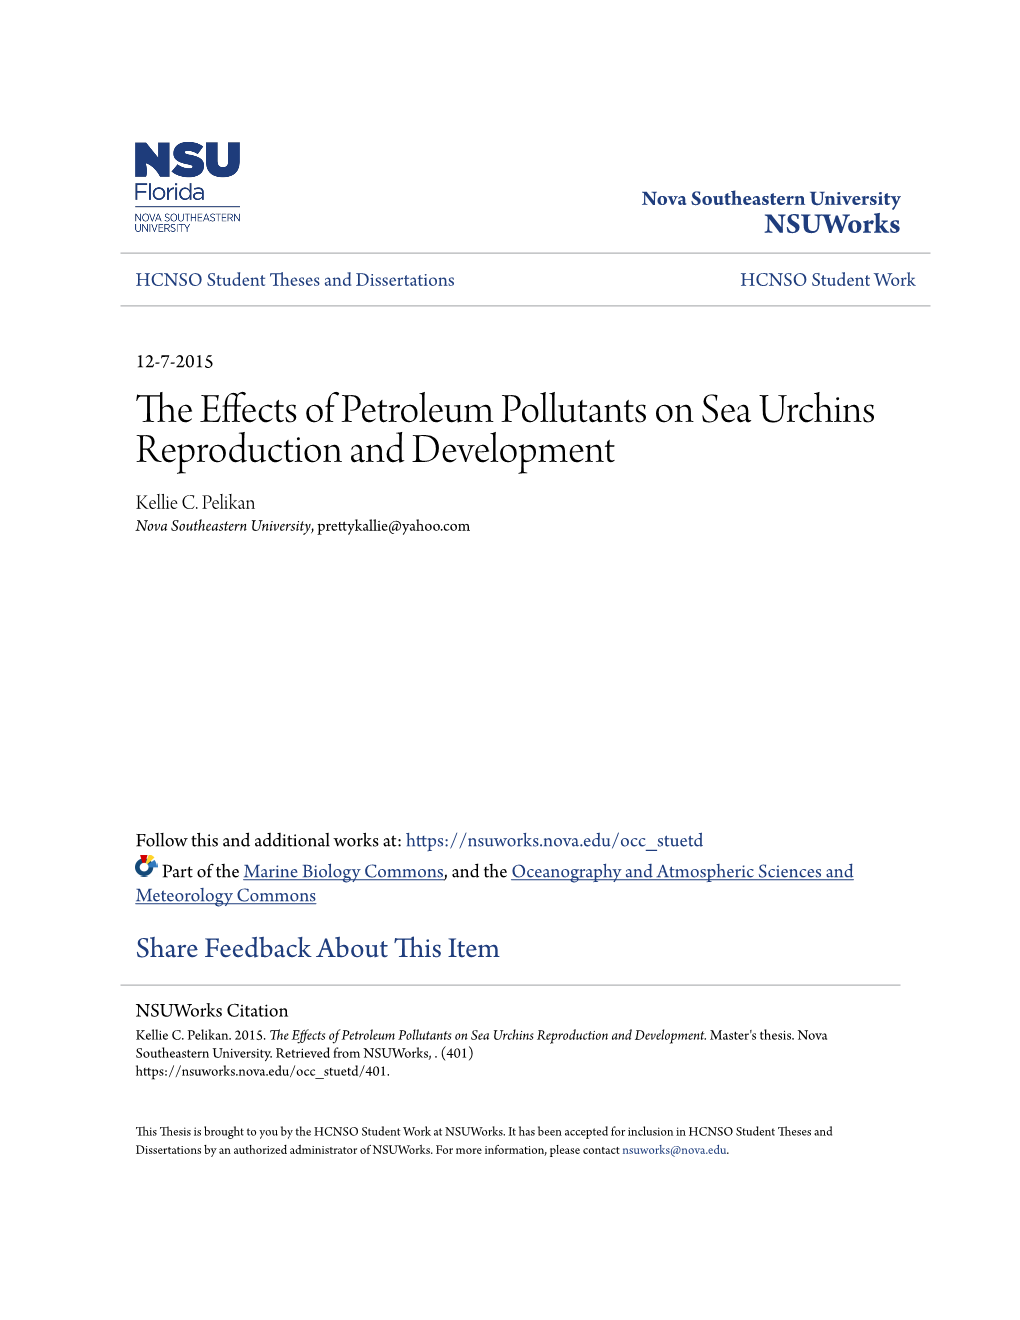 The Effects of Petroleum Pollutants on Sea Urchins Reproduction and Development